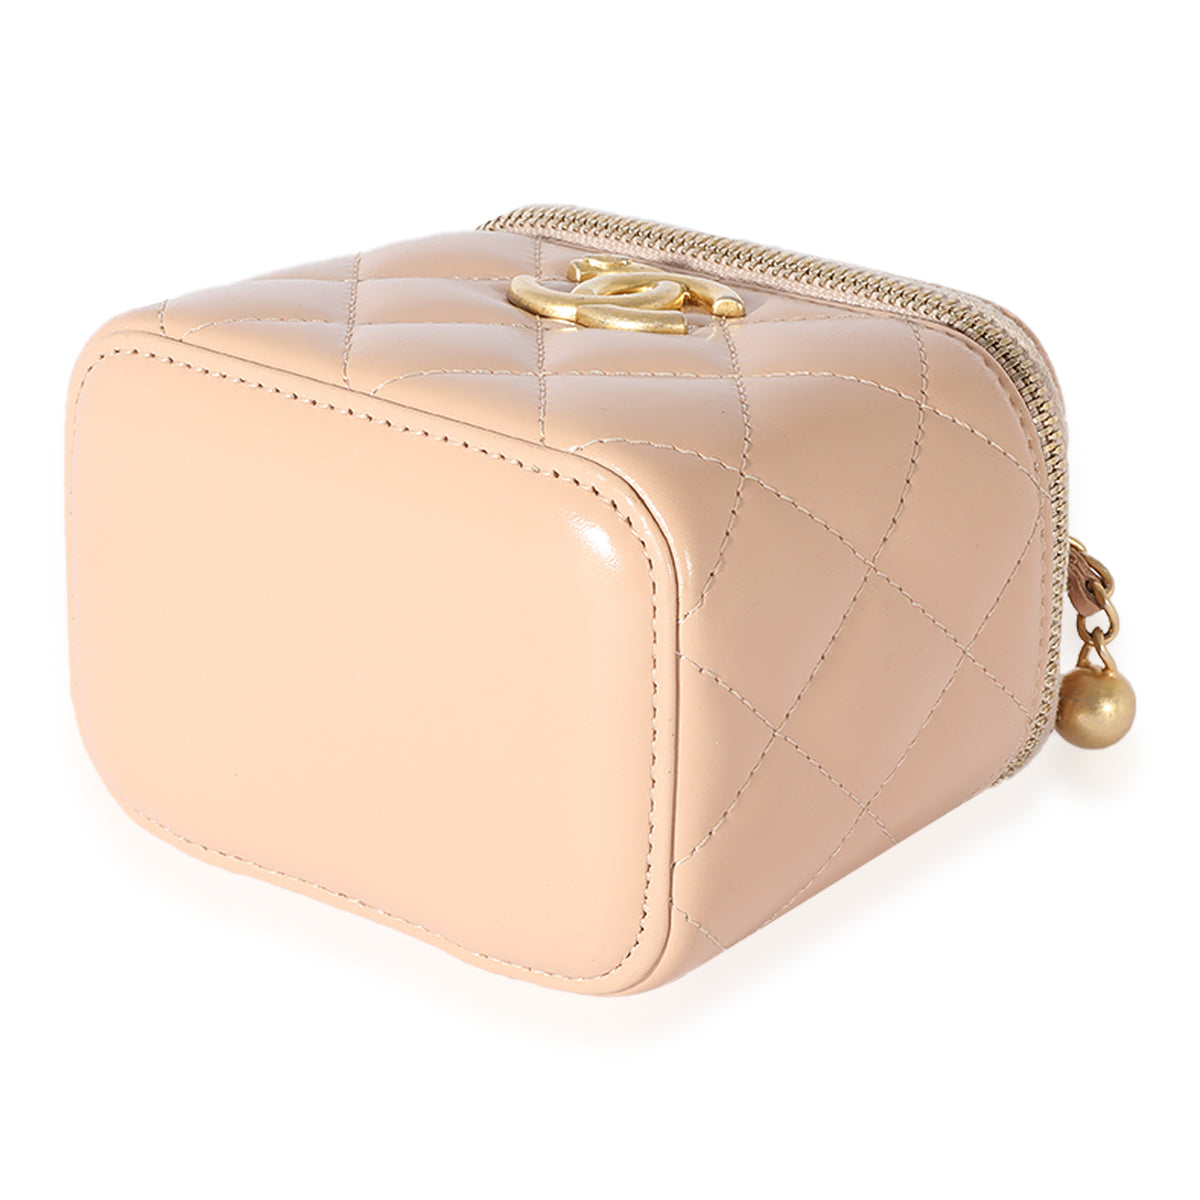 Chanel Pink Quilted Lambskin Pearl Crush Mini Vanity Case